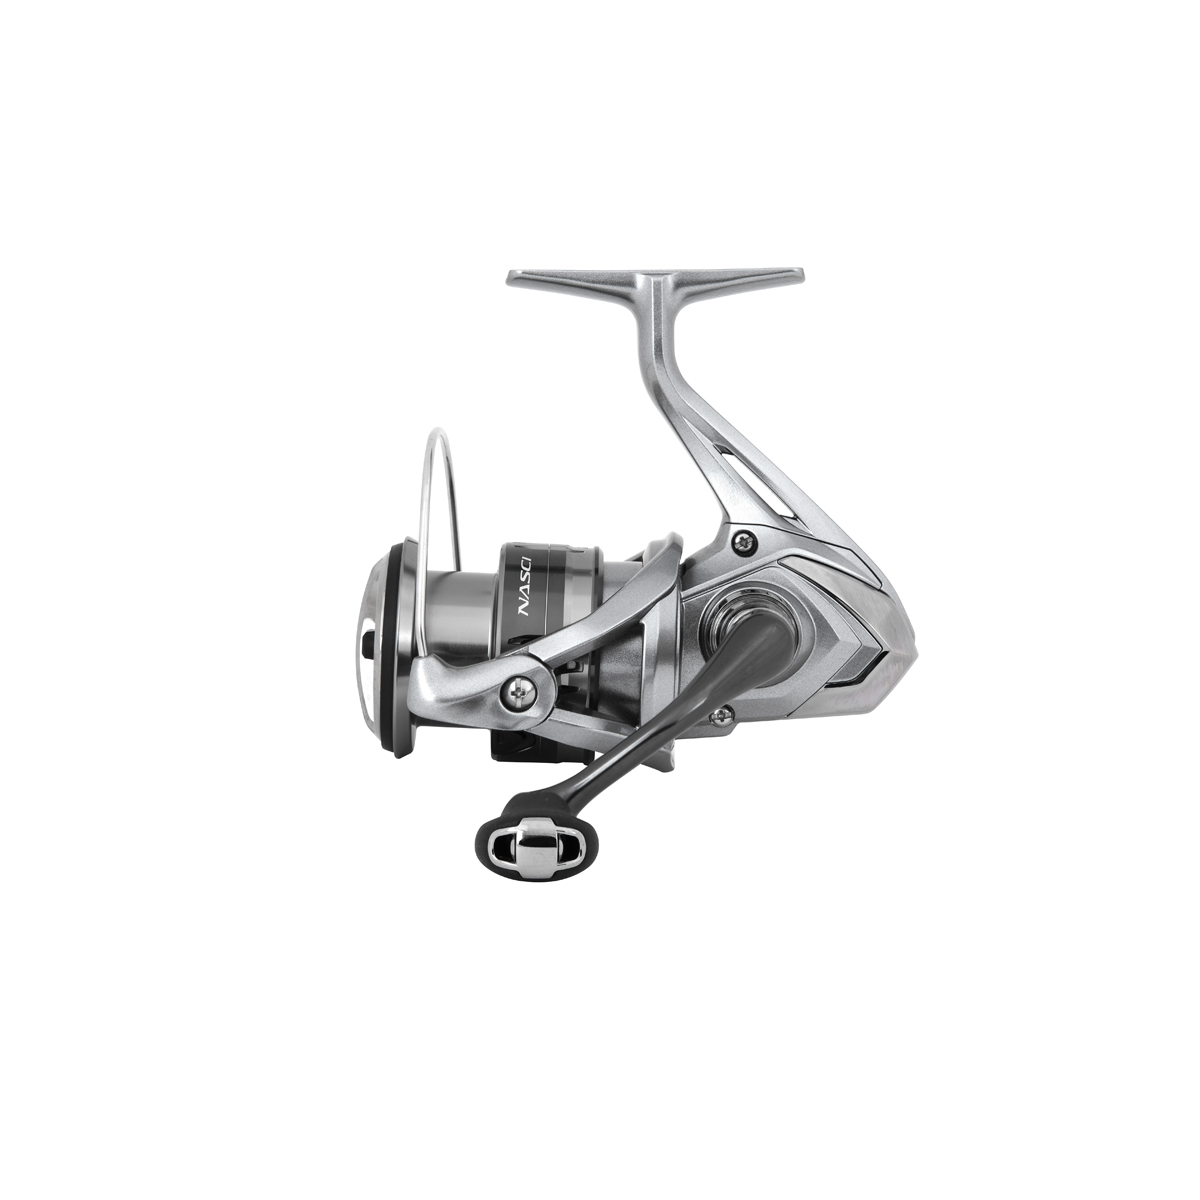 Shimano Nasci Spinning Reels from